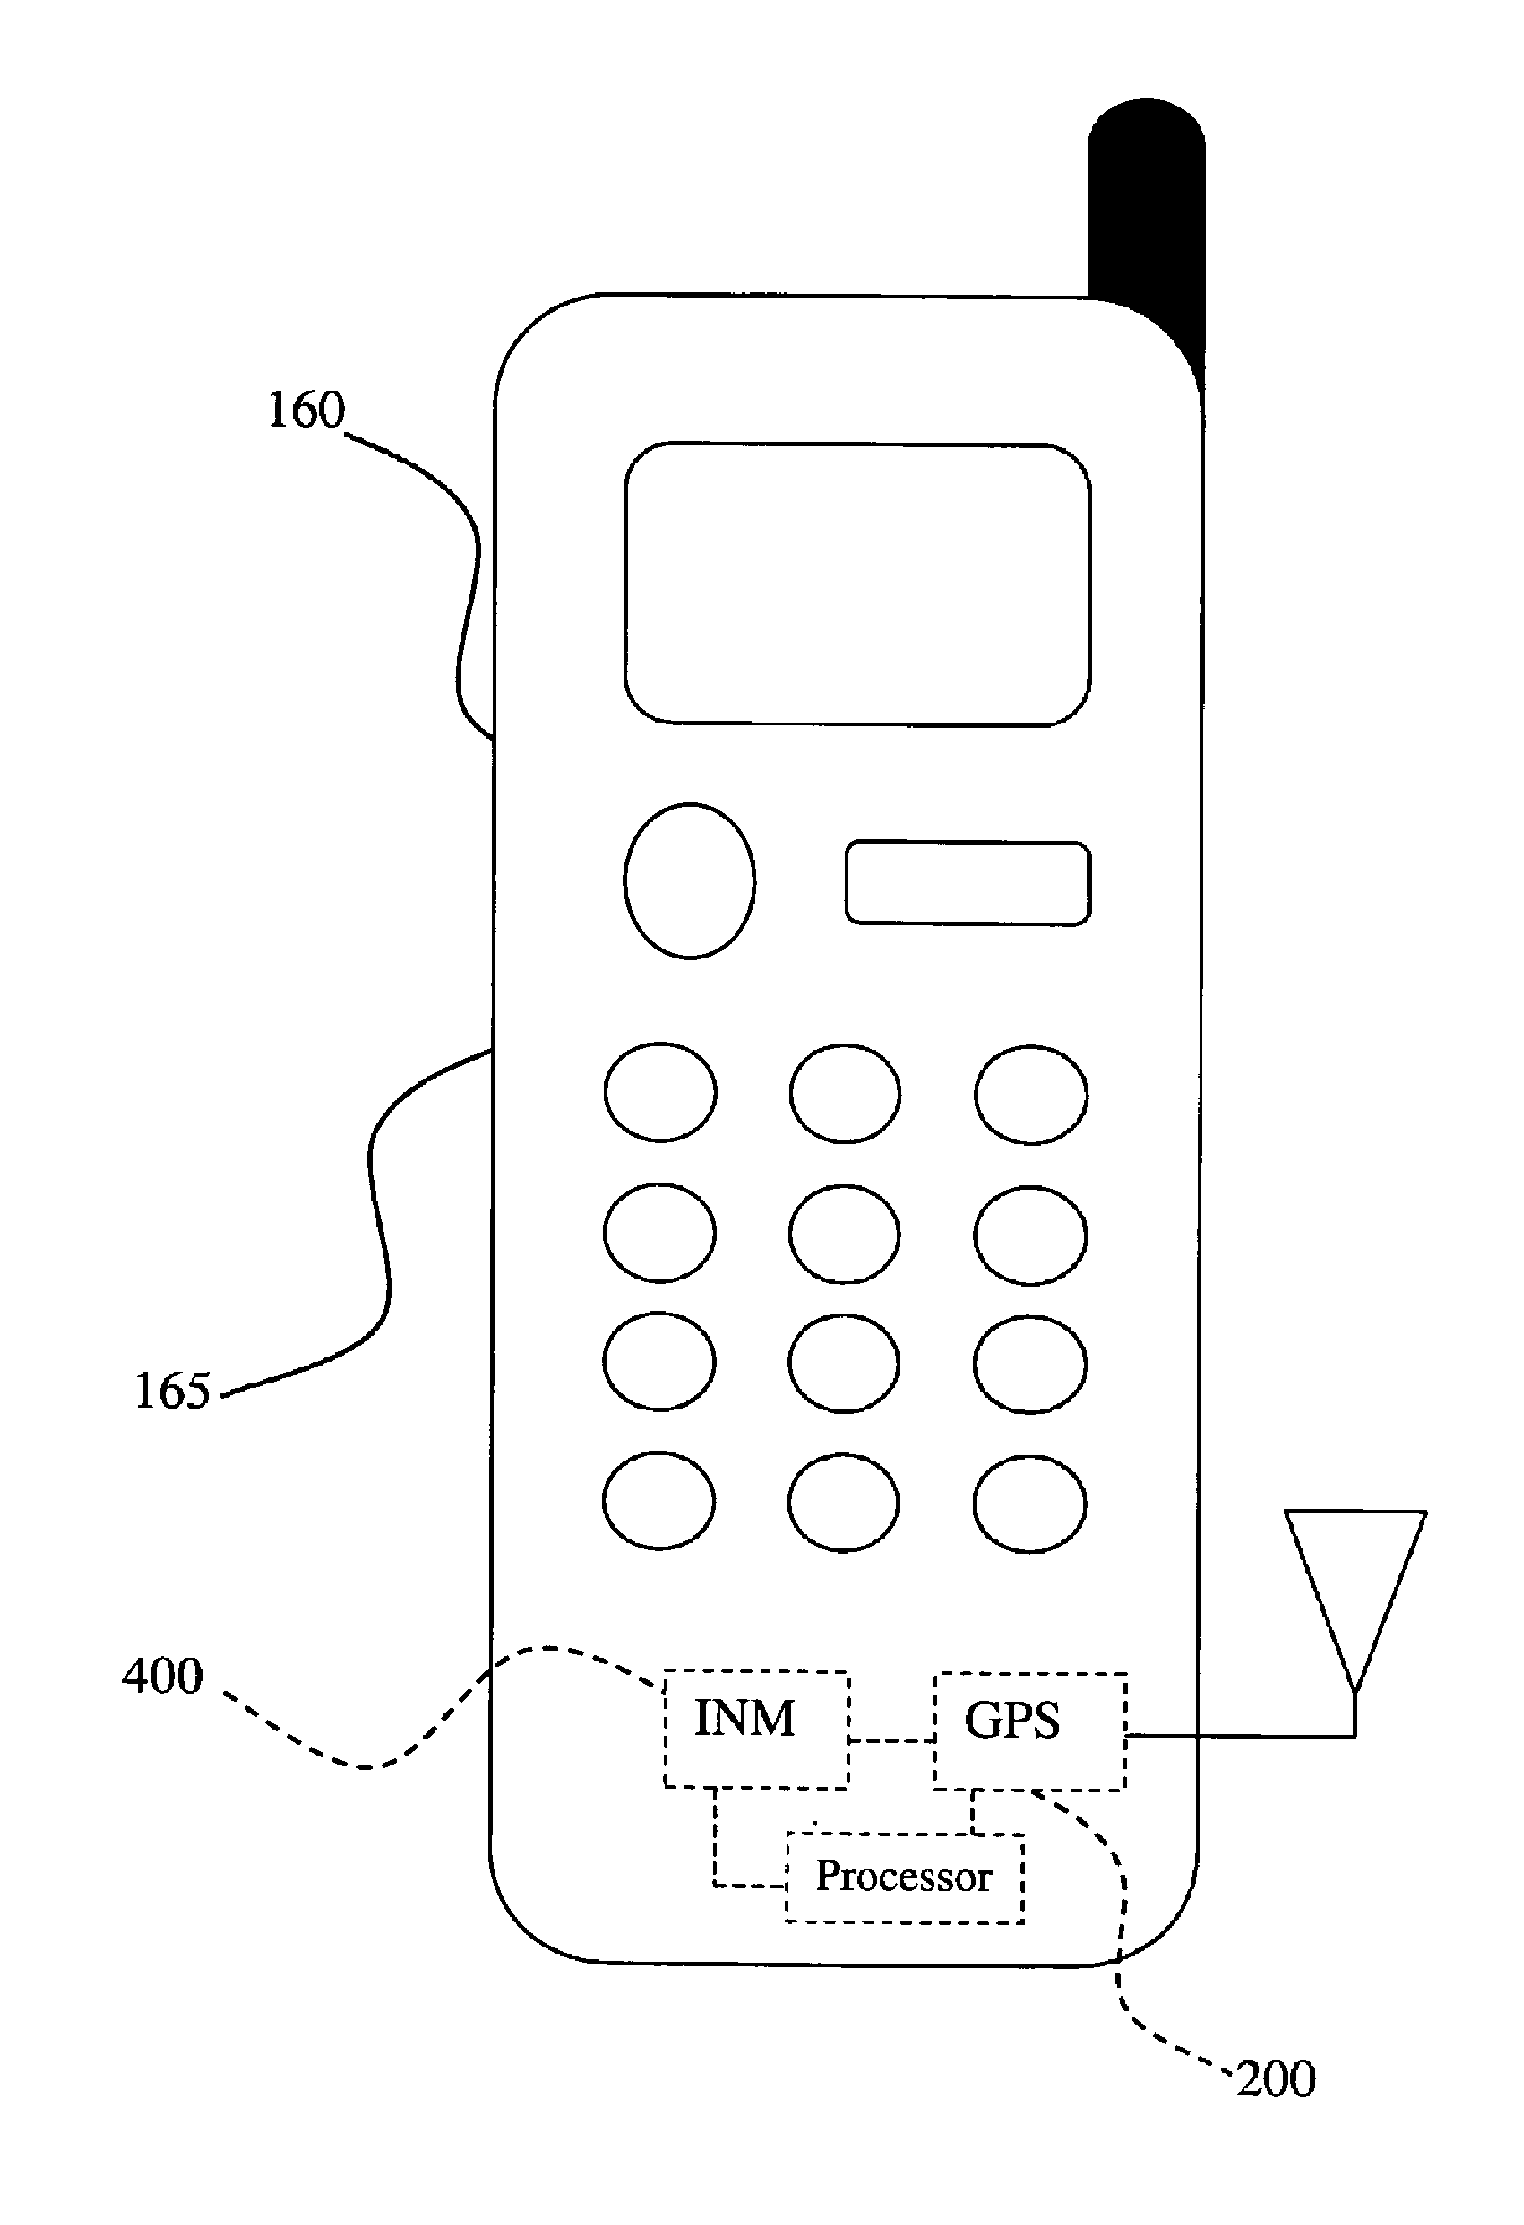 Method and system for monitoring and validating electronic transactions